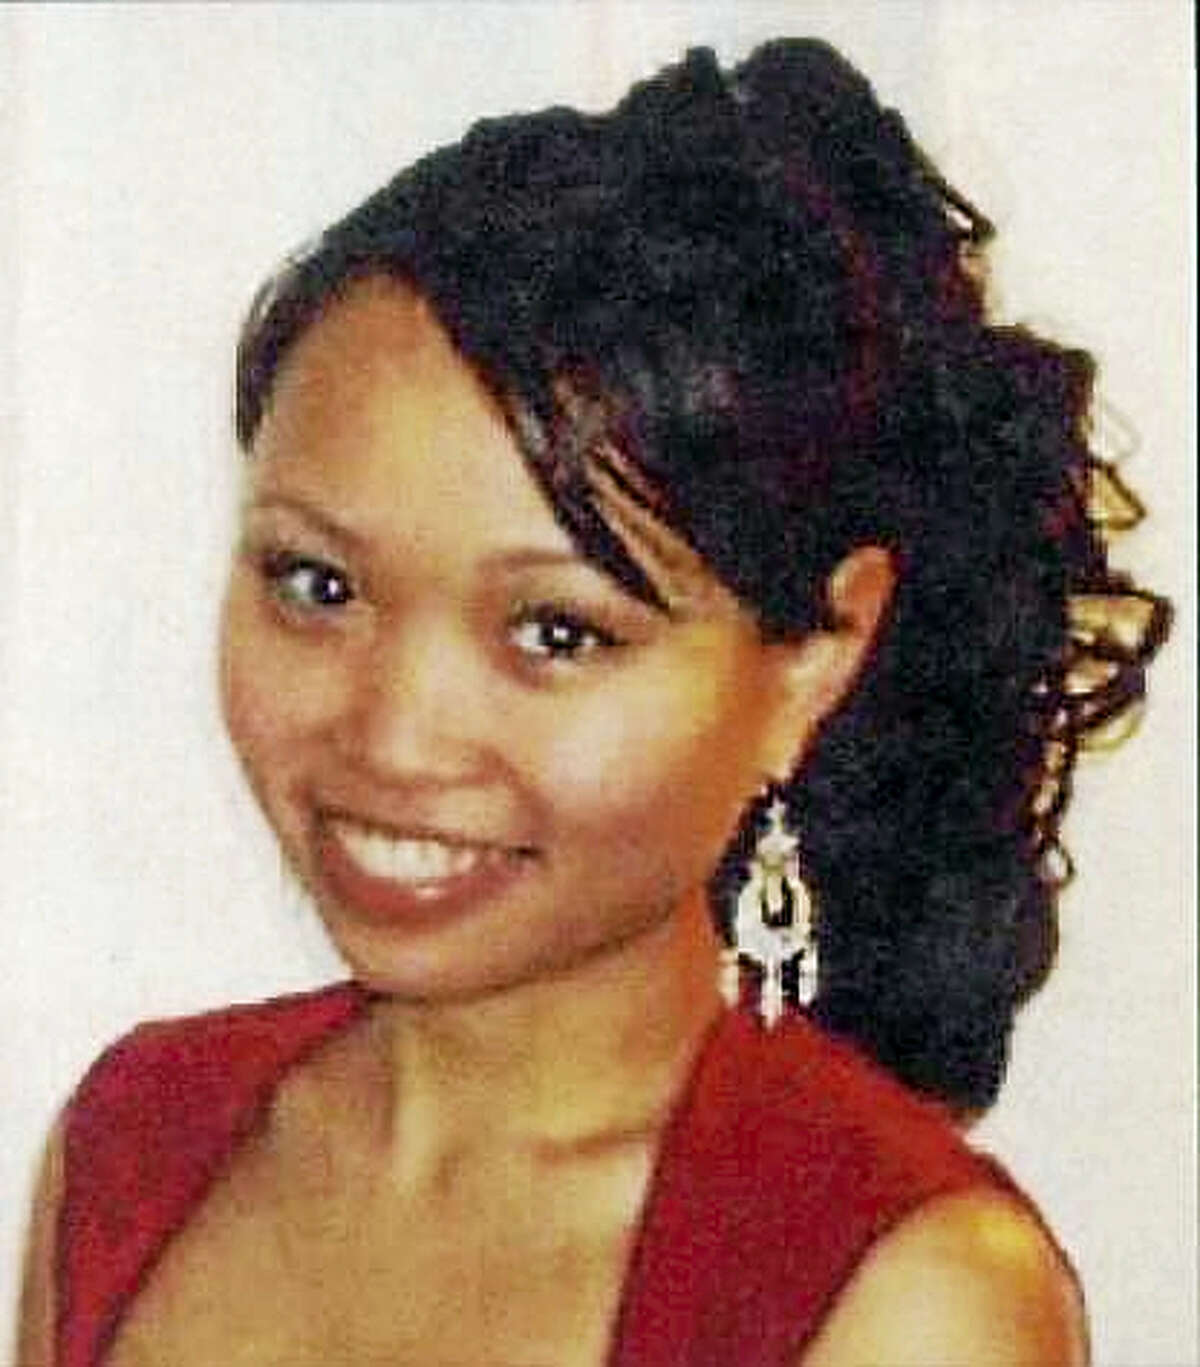 Yale graduate student Annie Le was slain in 2009.